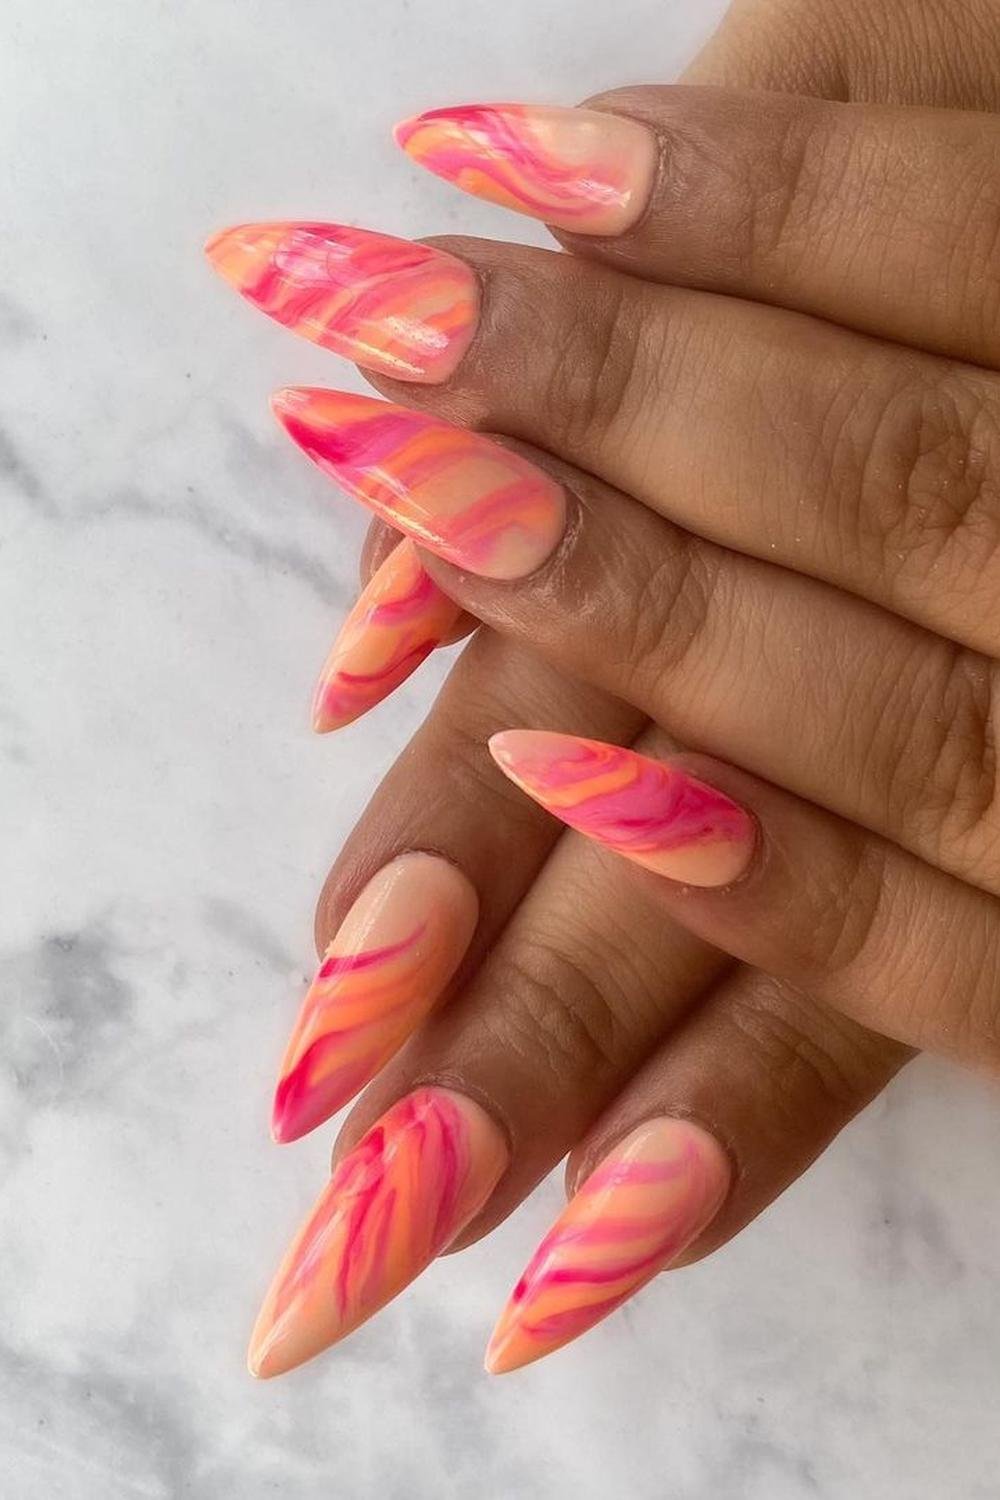 2 - Picture of Pink and Orange Nails